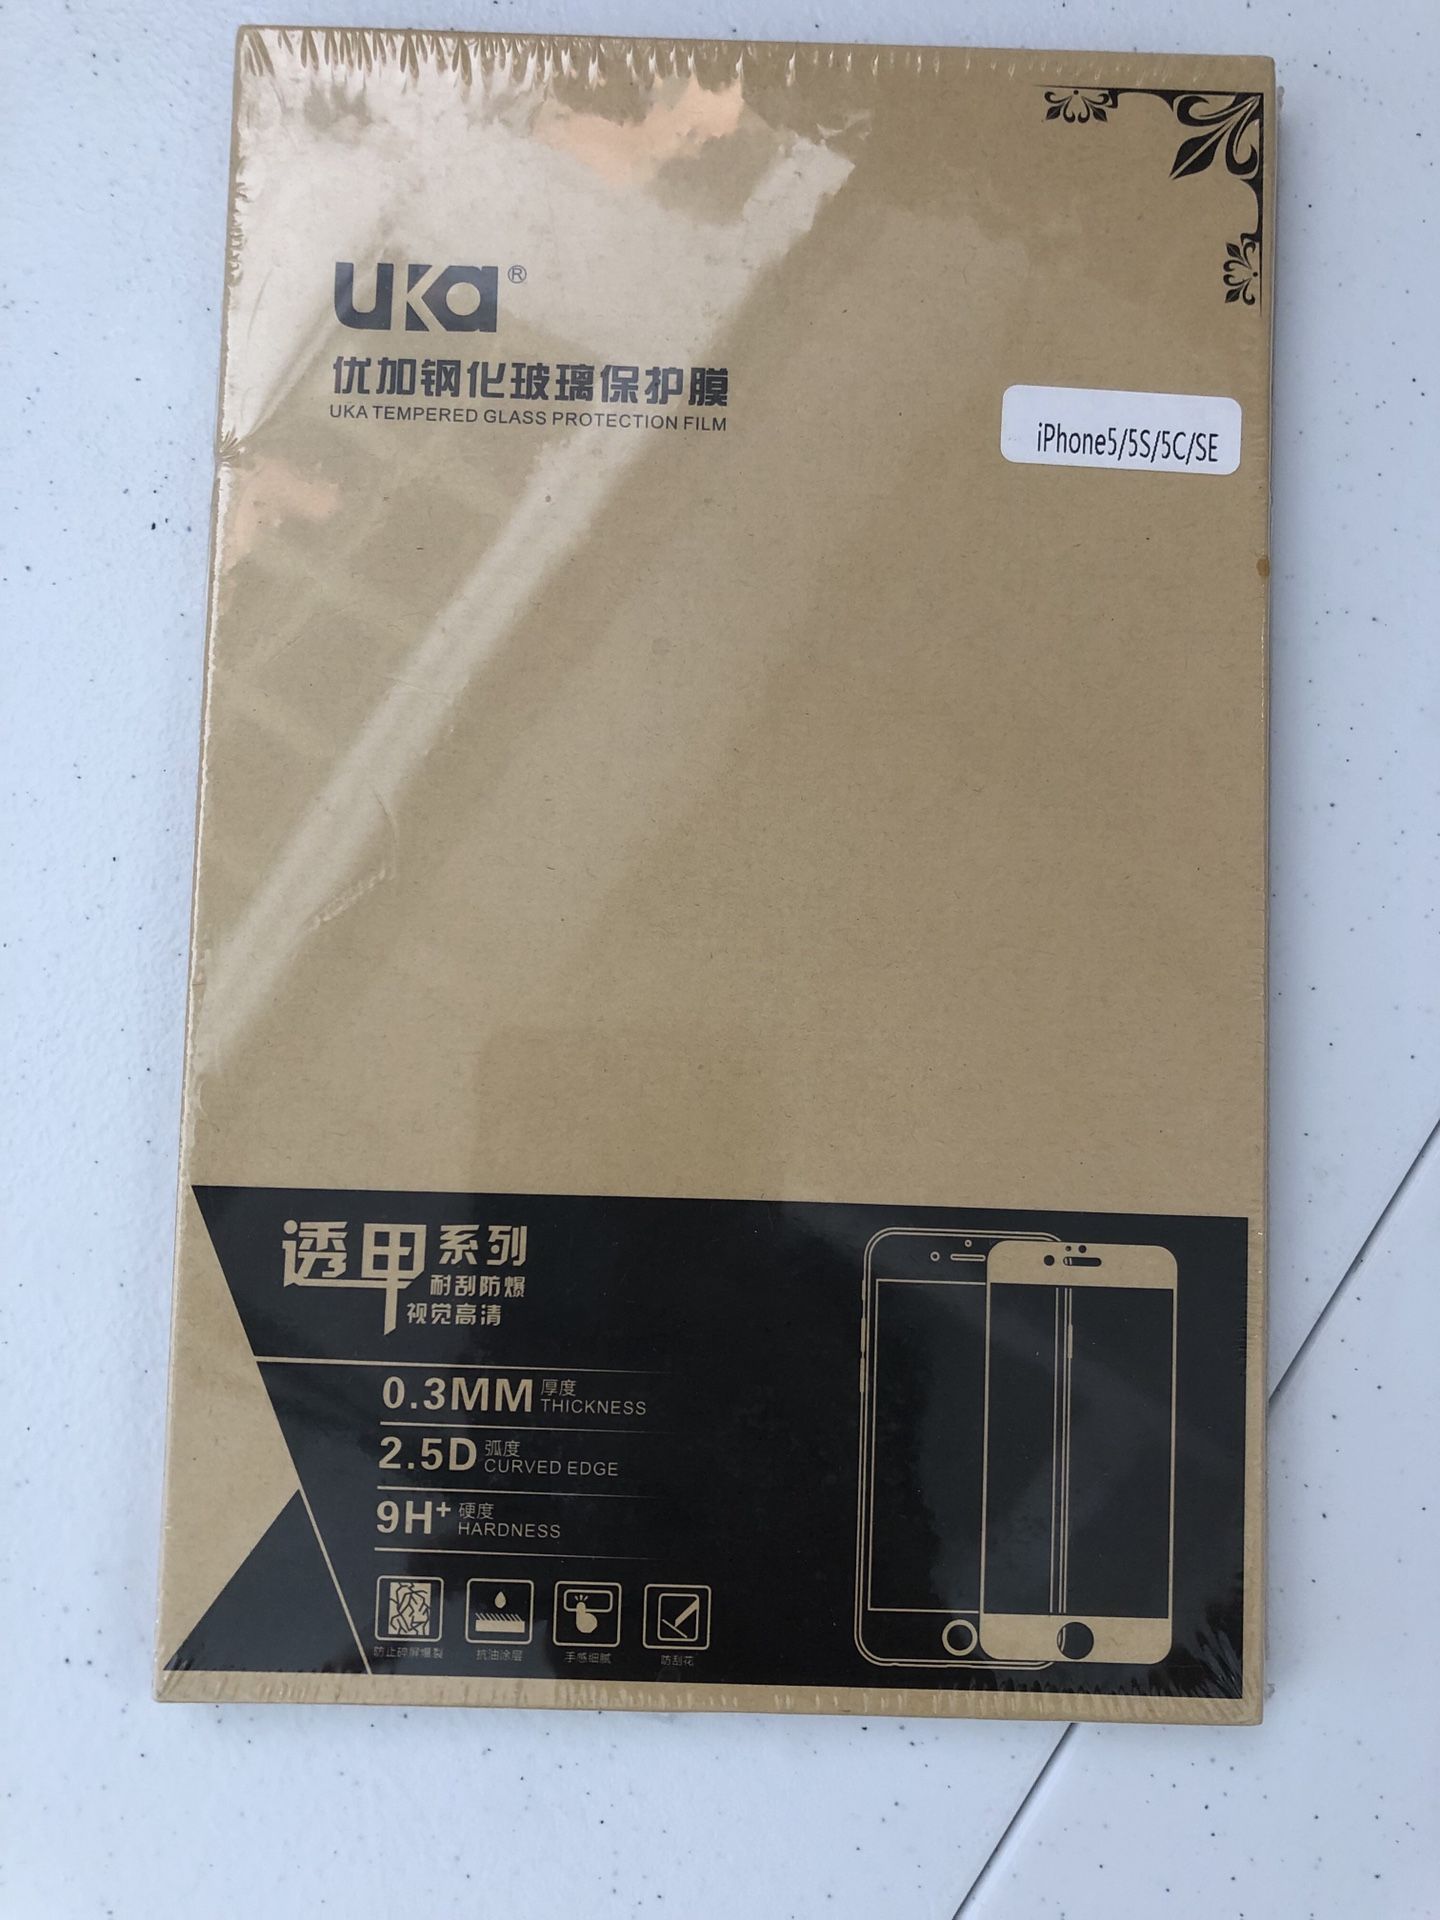 UKA Tempered Glass Screen Protector for iPhone SE/5S/5C/5